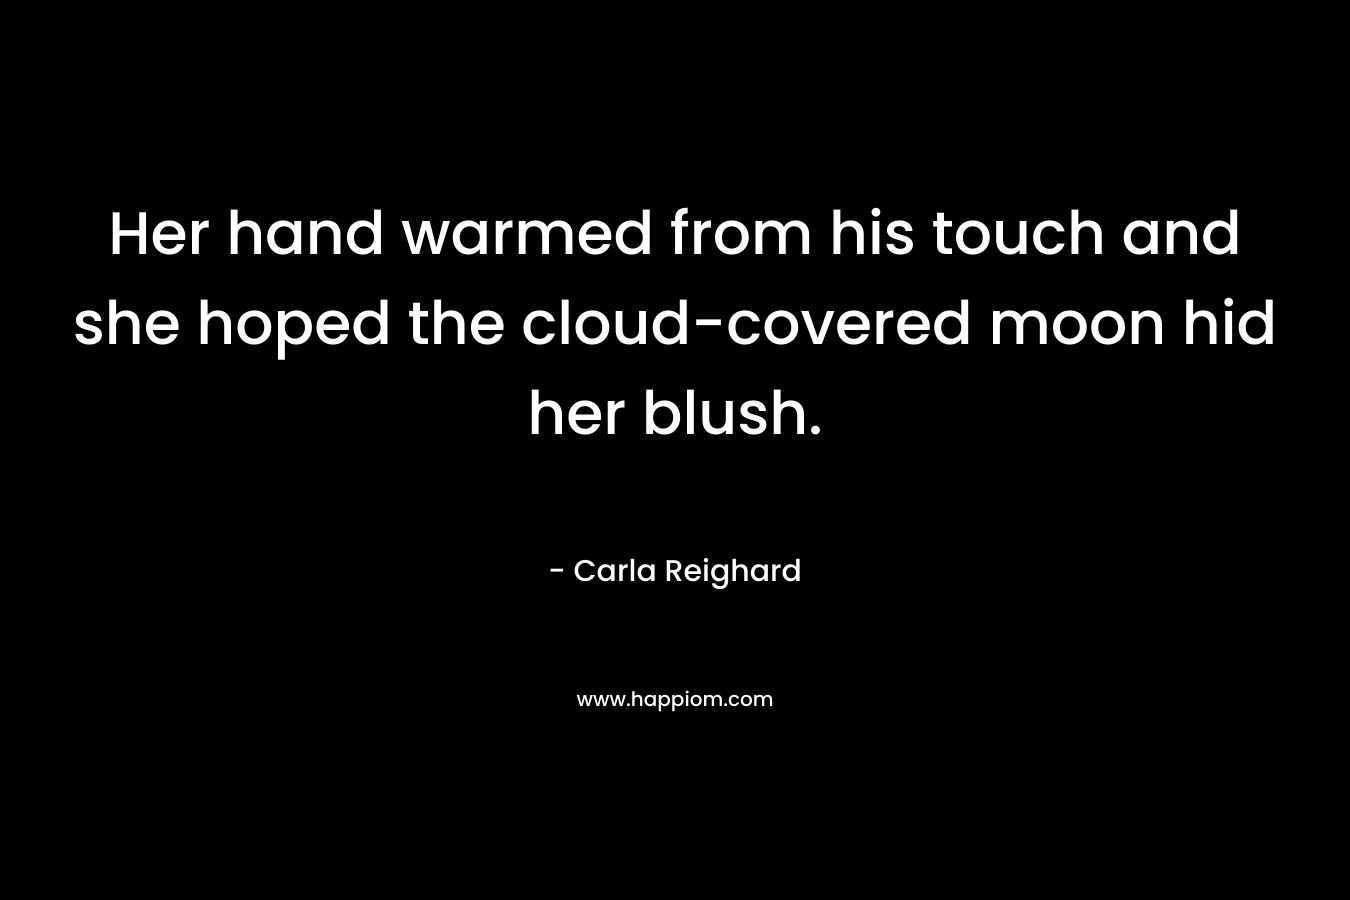 Her hand warmed from his touch and she hoped the cloud-covered moon hid her blush.